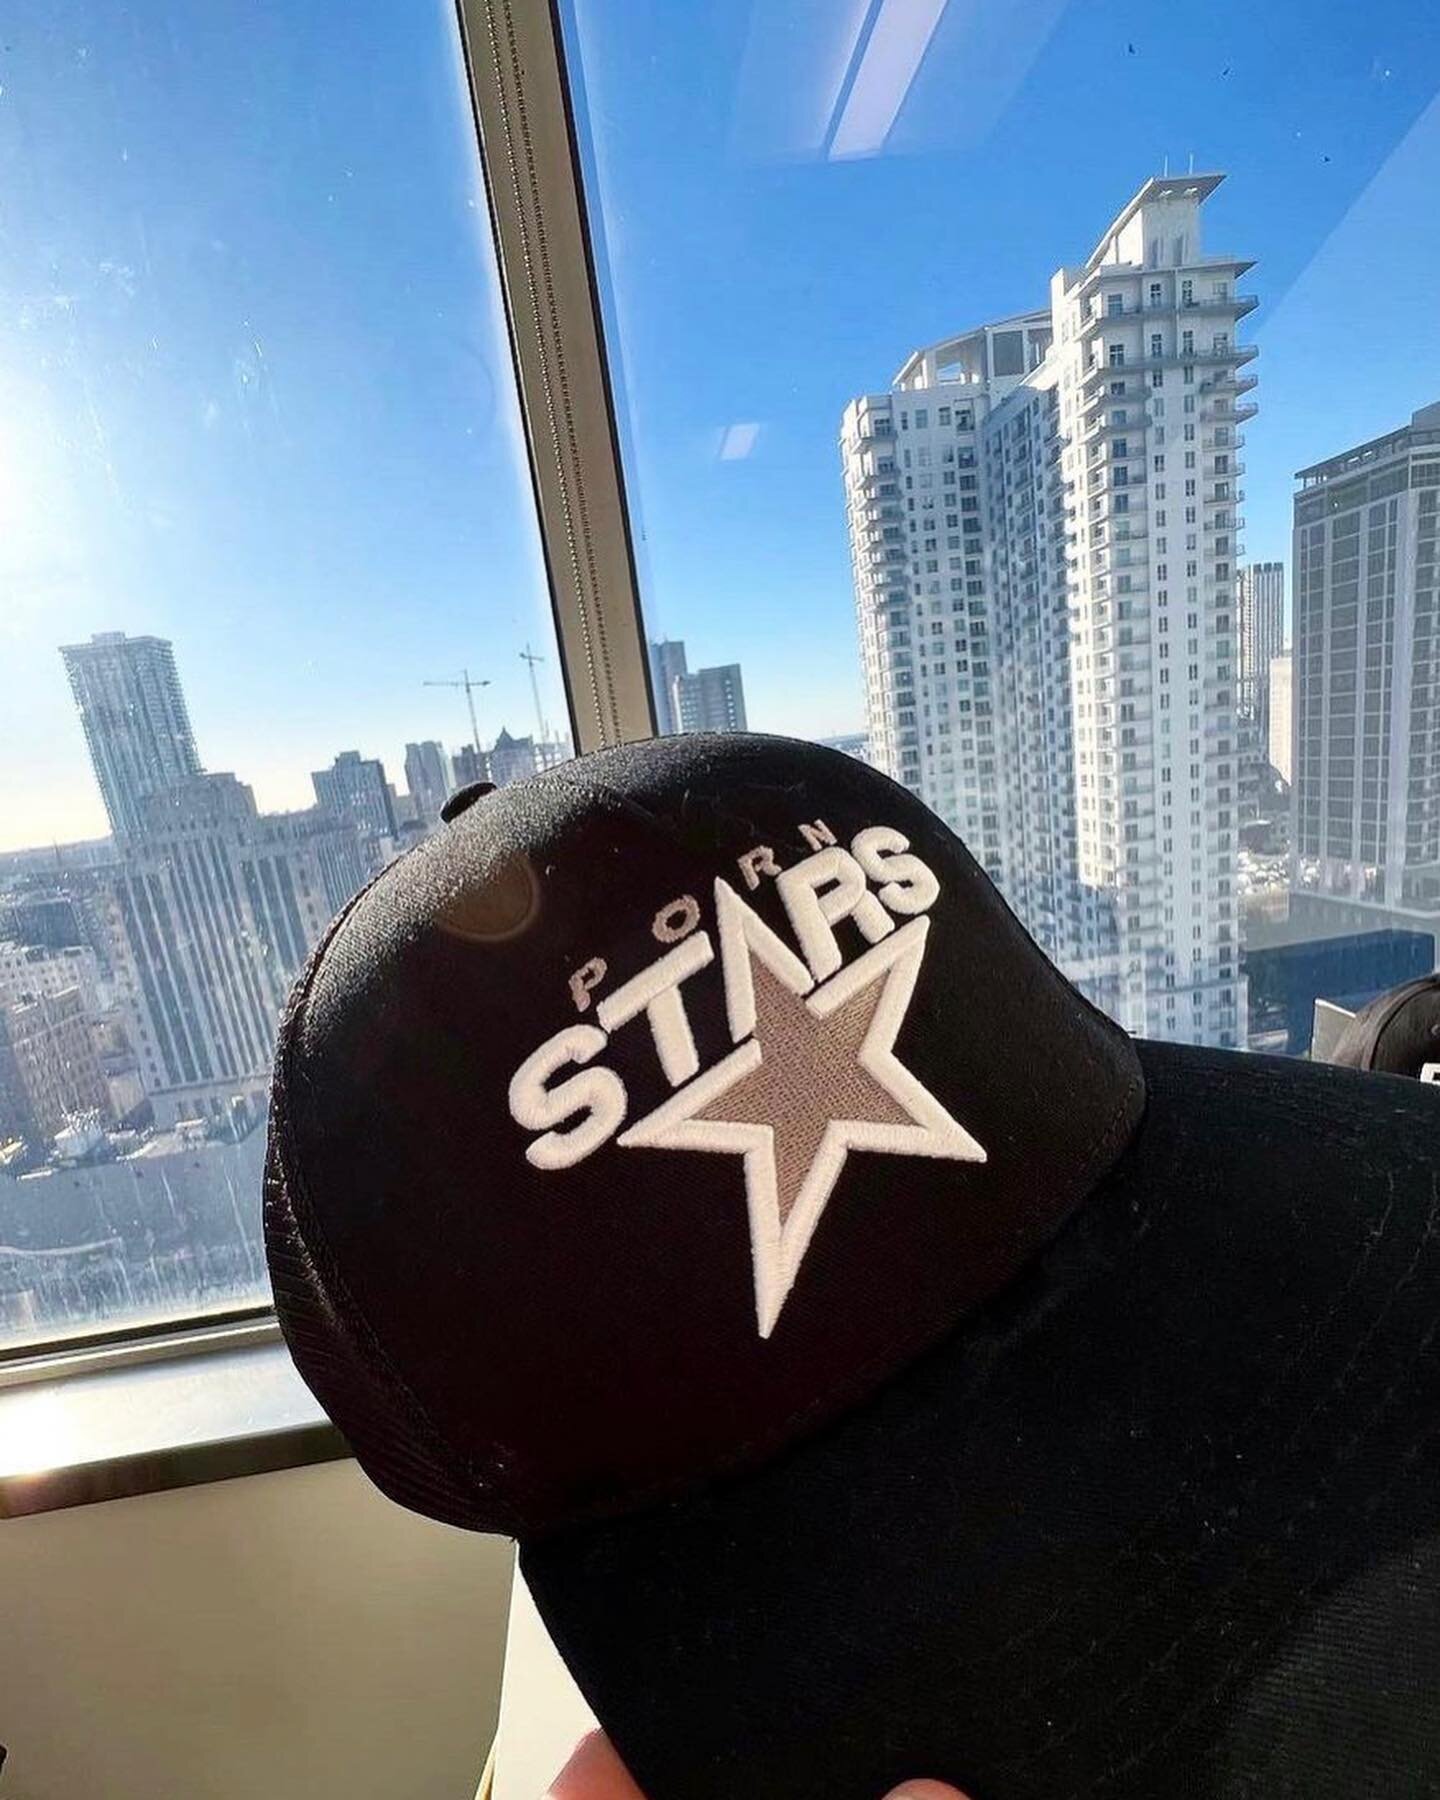 P💫RN STAR HAT
Coming OUT this week! 
You can find our tees at your local stores: 
@twofeetundr
@unknownclothingct 
@survivalmiami 
@shoegallery 
@shopbasico 
@exclusive1015 
@o_fresh 
&amp; more..

Coming soon to&hellip;
📍LA
📍Madrid 
📍Chicago
📍B